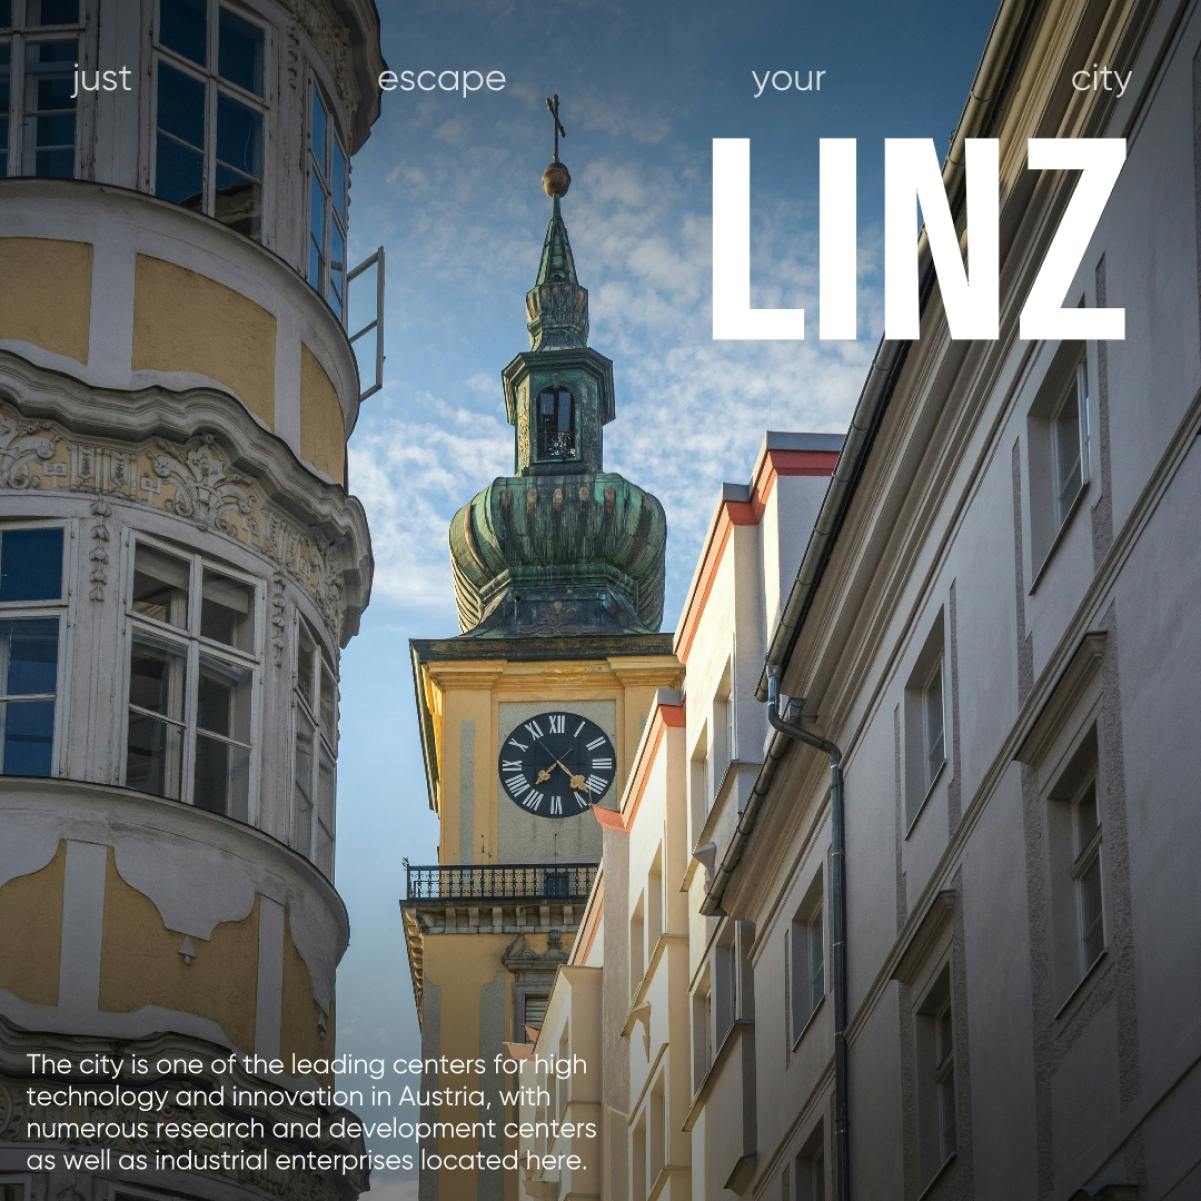 Self-guided scavenger hunt in Linz